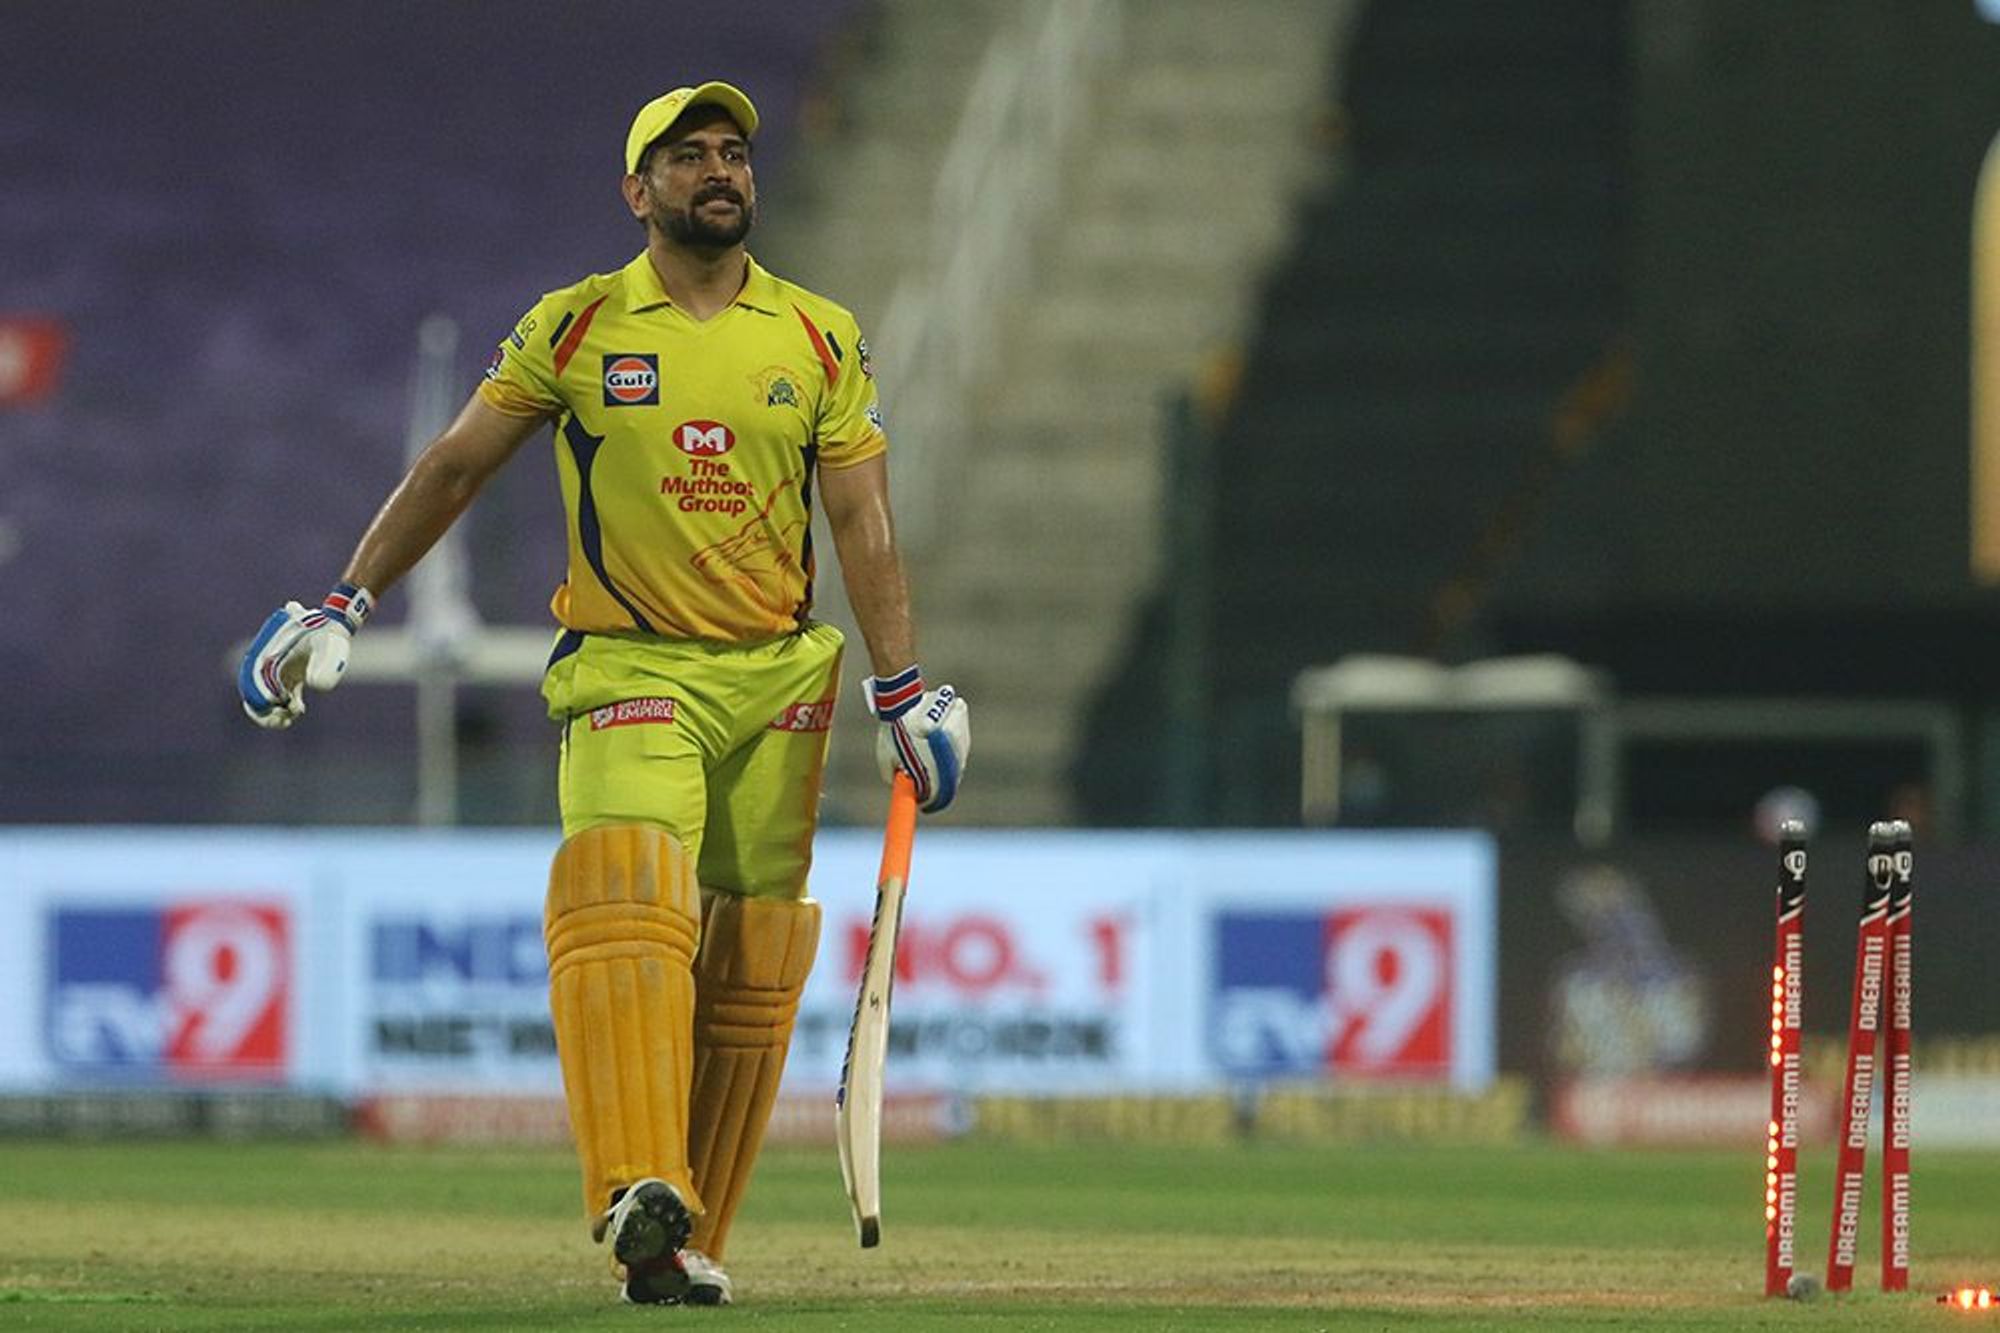 Dhoni should play well in csk last match of the IPL 2020 season